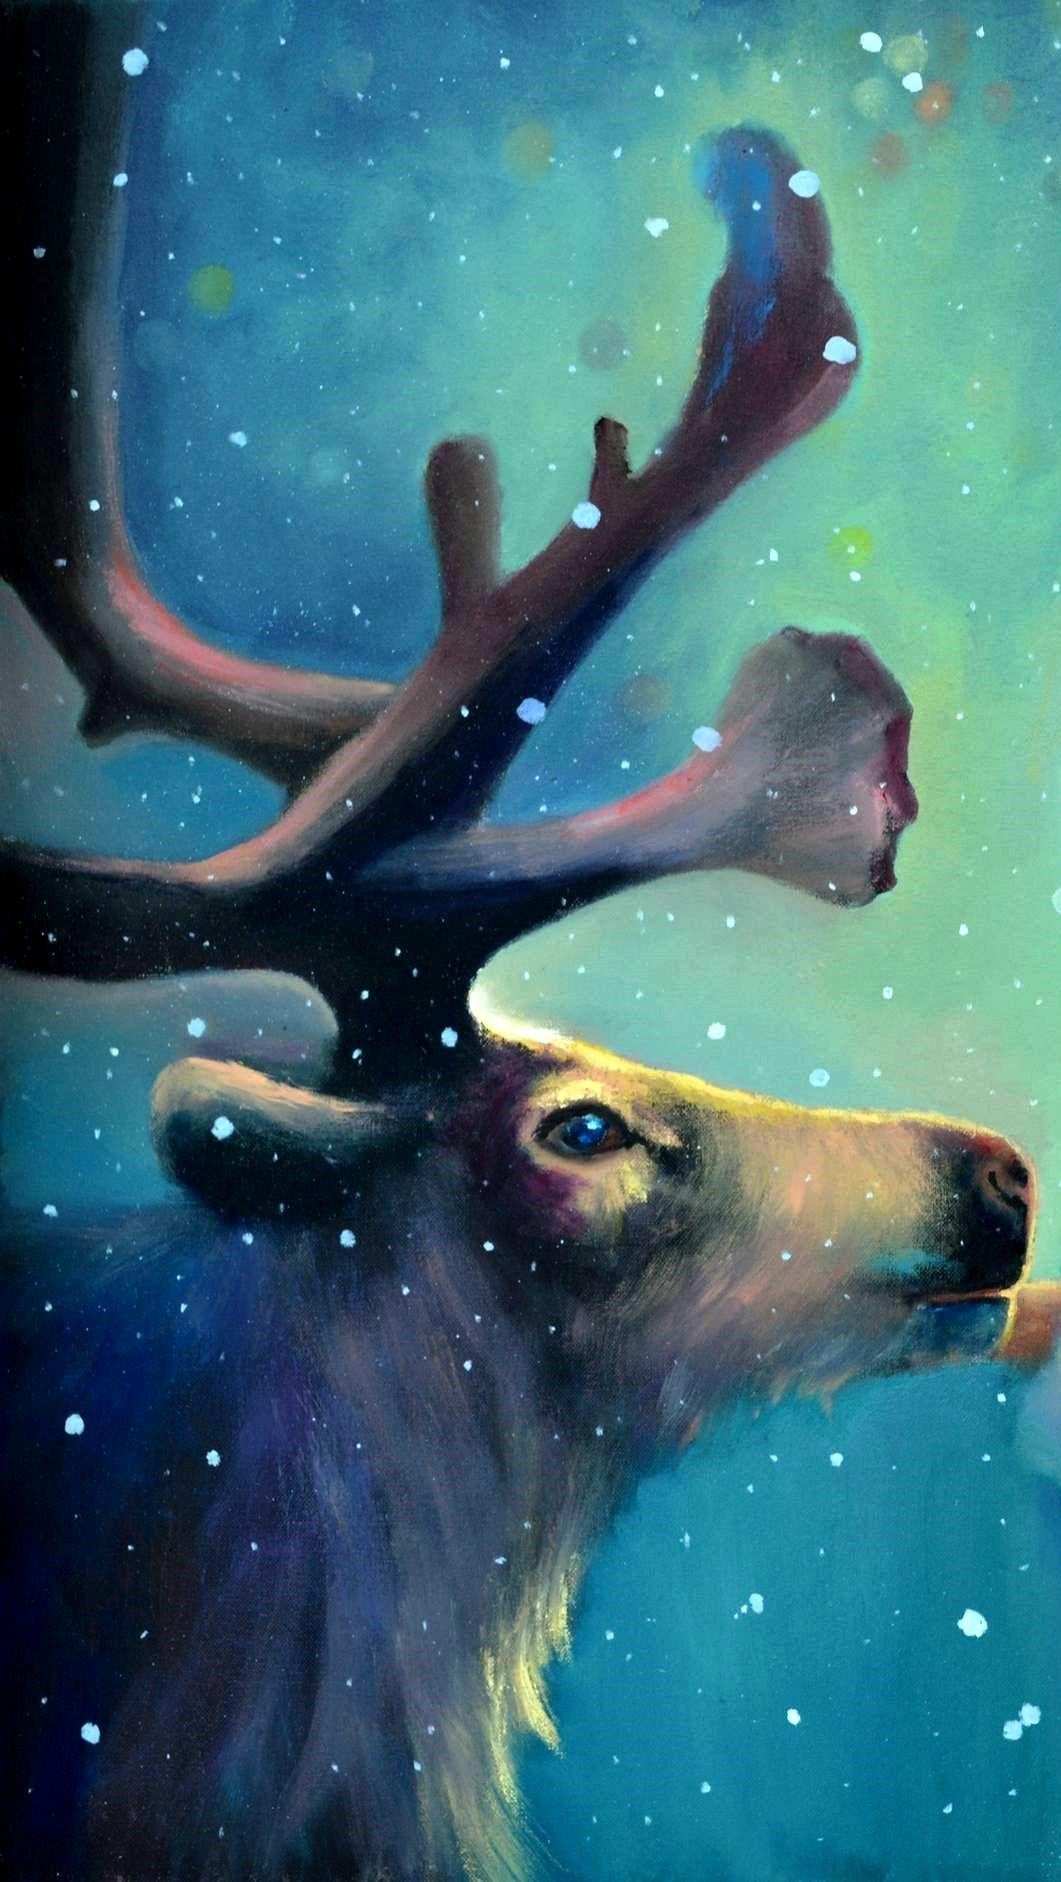 In this oil painting, I've delved into the tender connection between nature and childhood. The way the child and the majestic animal share a moment of silent conversation amidst the softly falling snow captures a sense of wonder and purity. Each